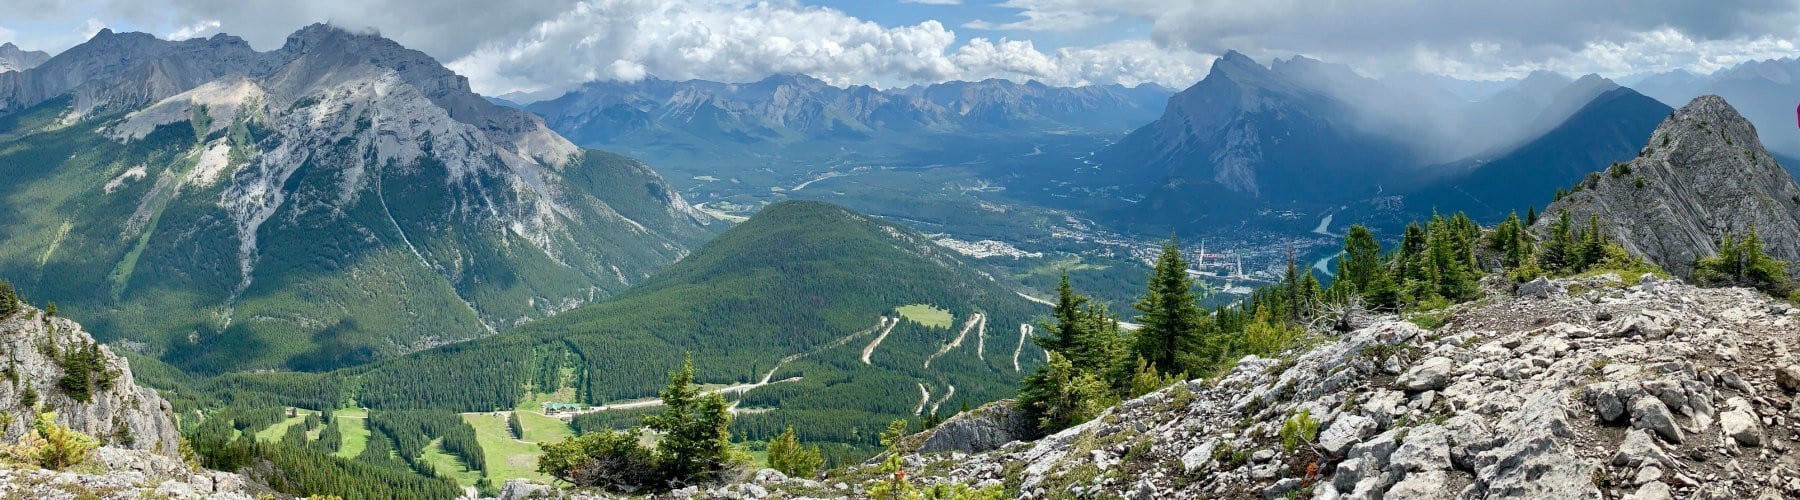 View from the top of Mt Norquay Via Ferrata Banff